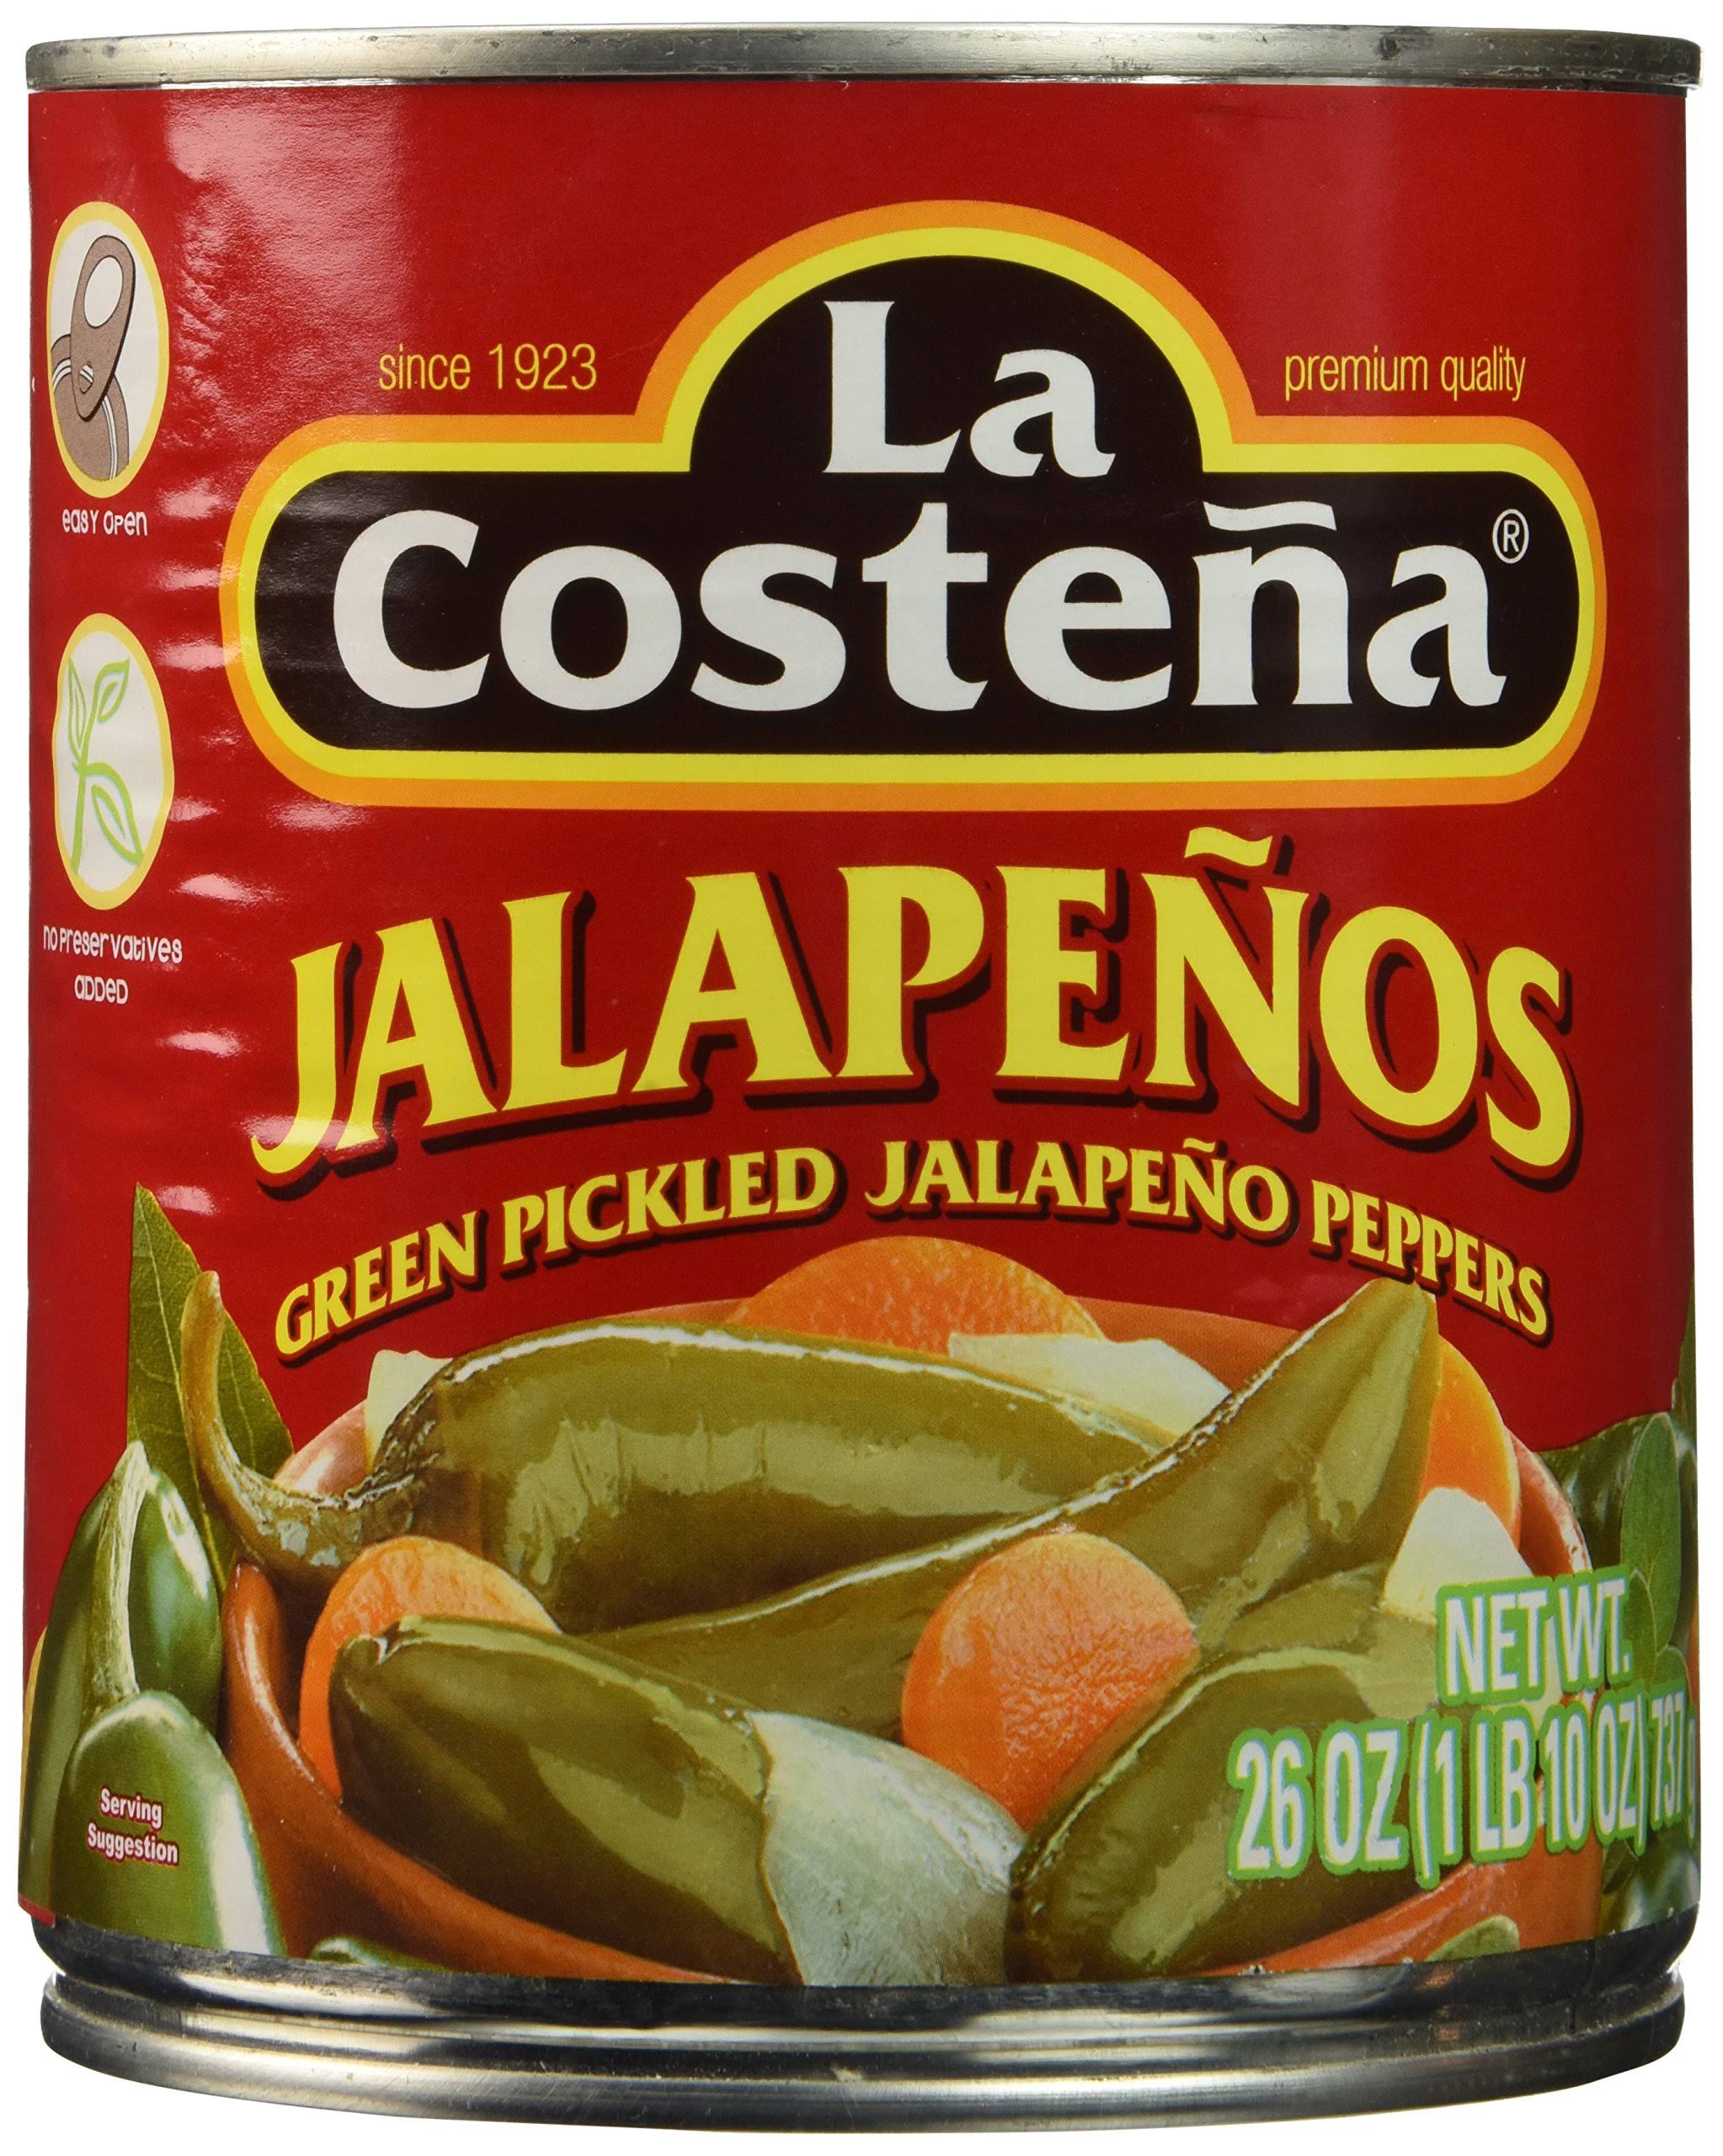 La Costeña Green Pickled Jalapeño Peppers - 737g